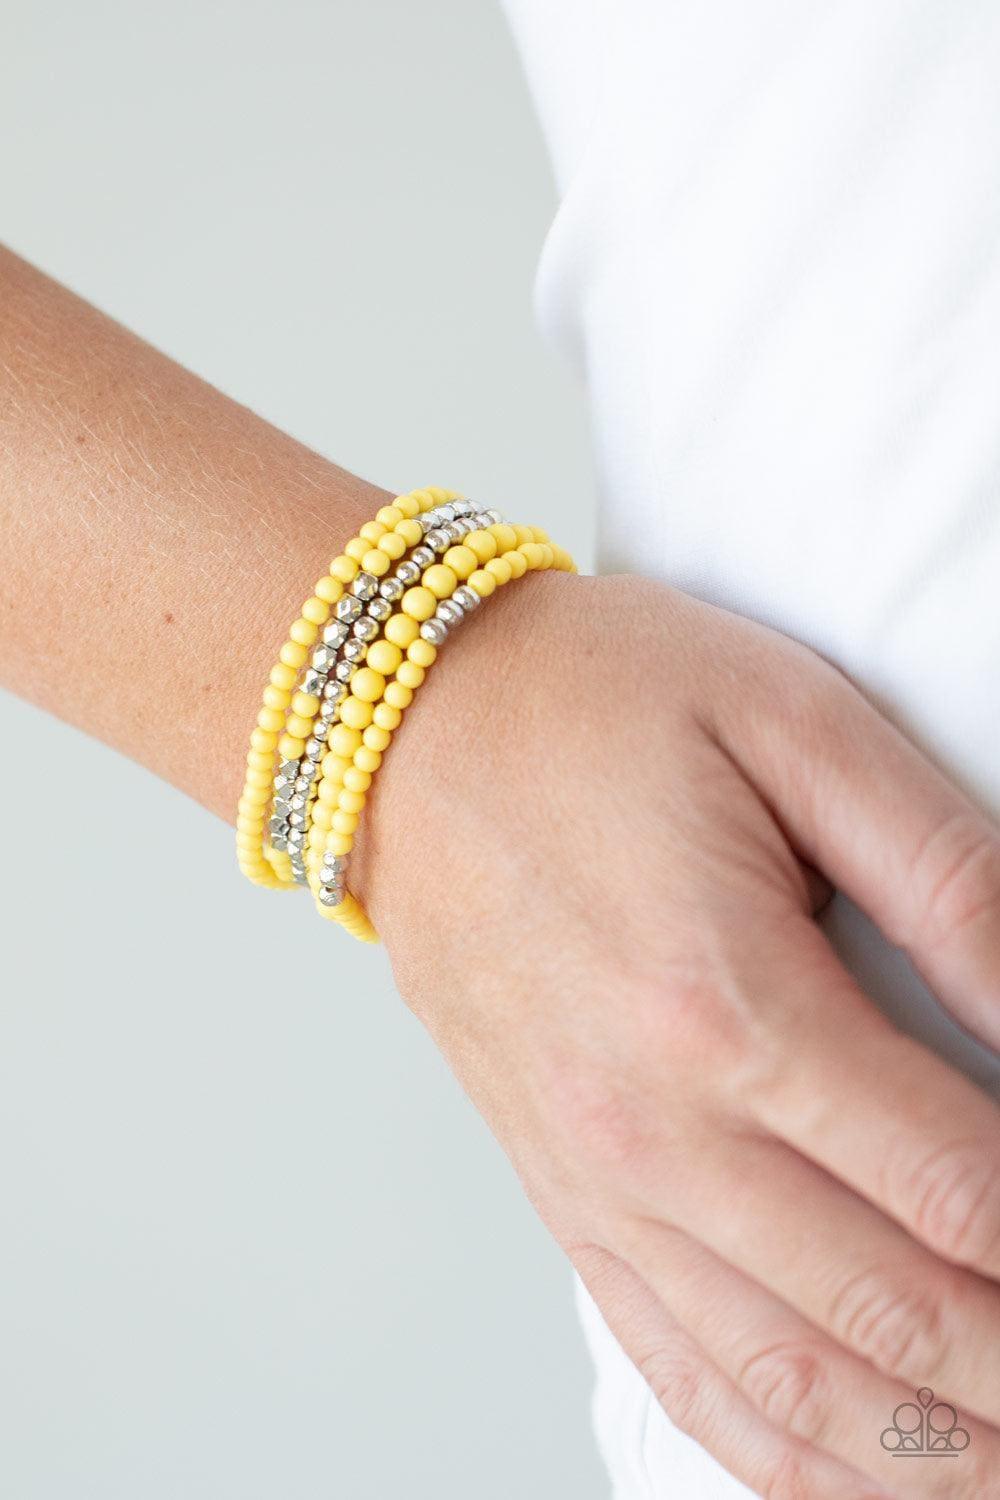 Paparazzi Accessories - Stacked Showcase - Yellow Bracelets - Bling by JessieK